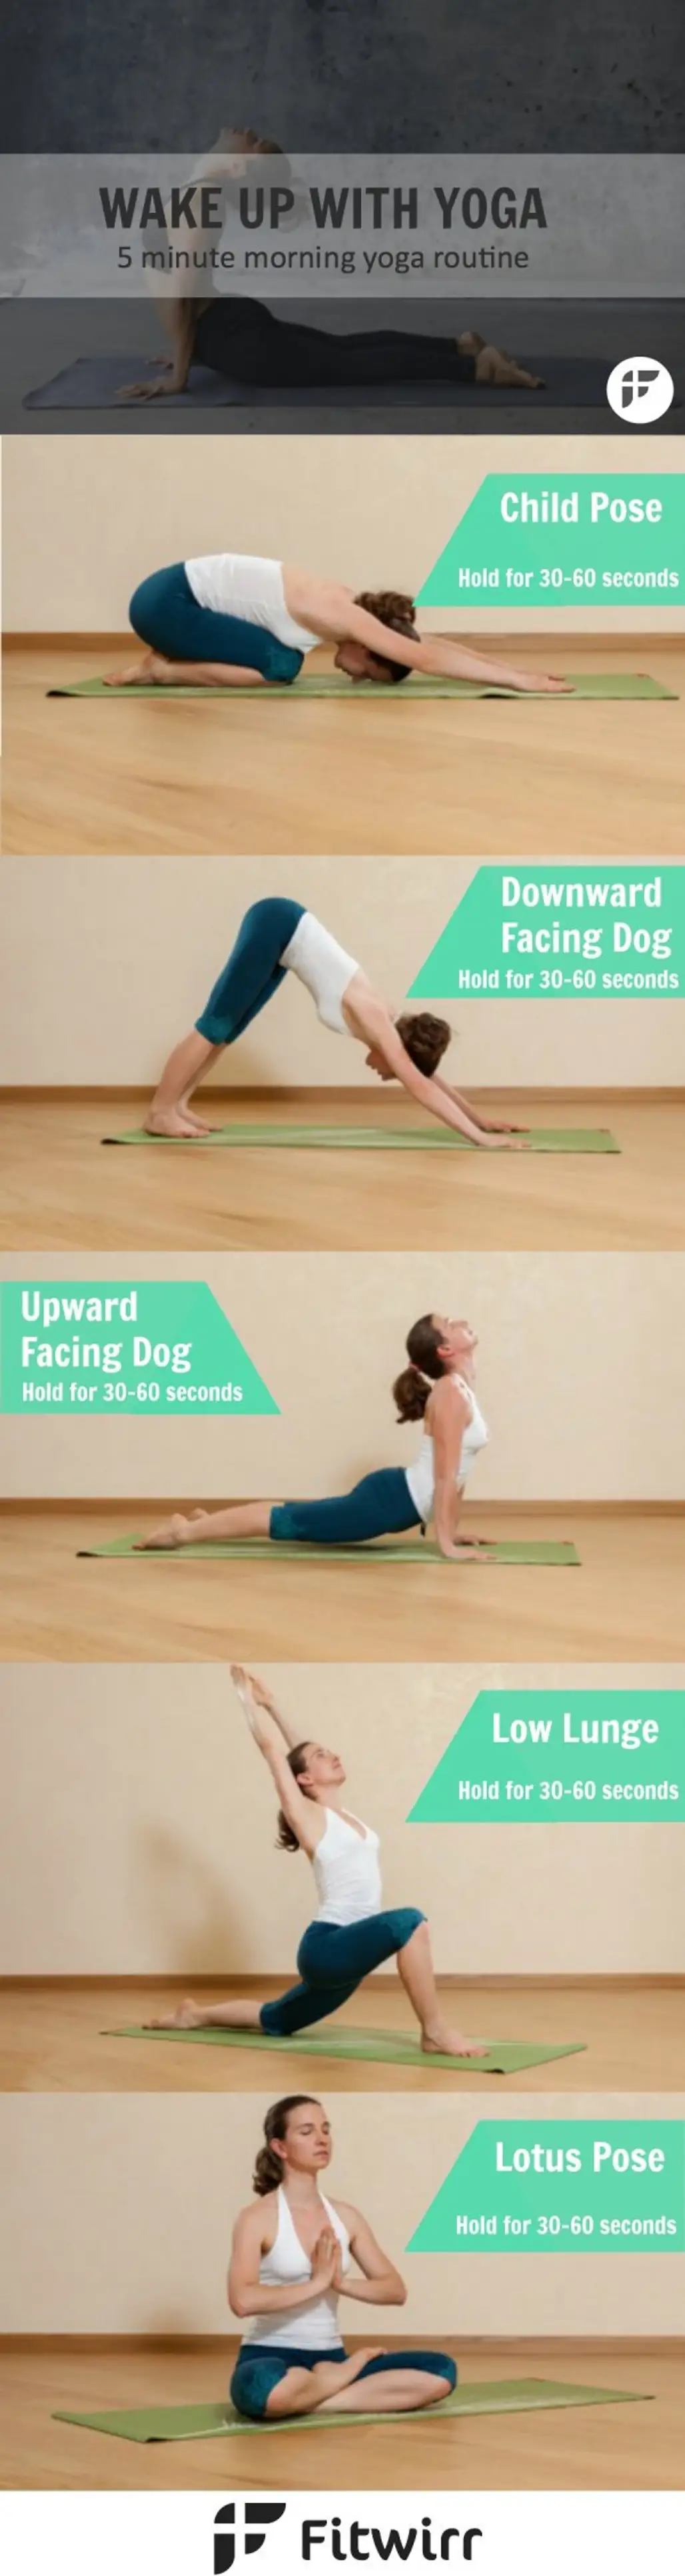 5-Minute Morning Yoga Routine